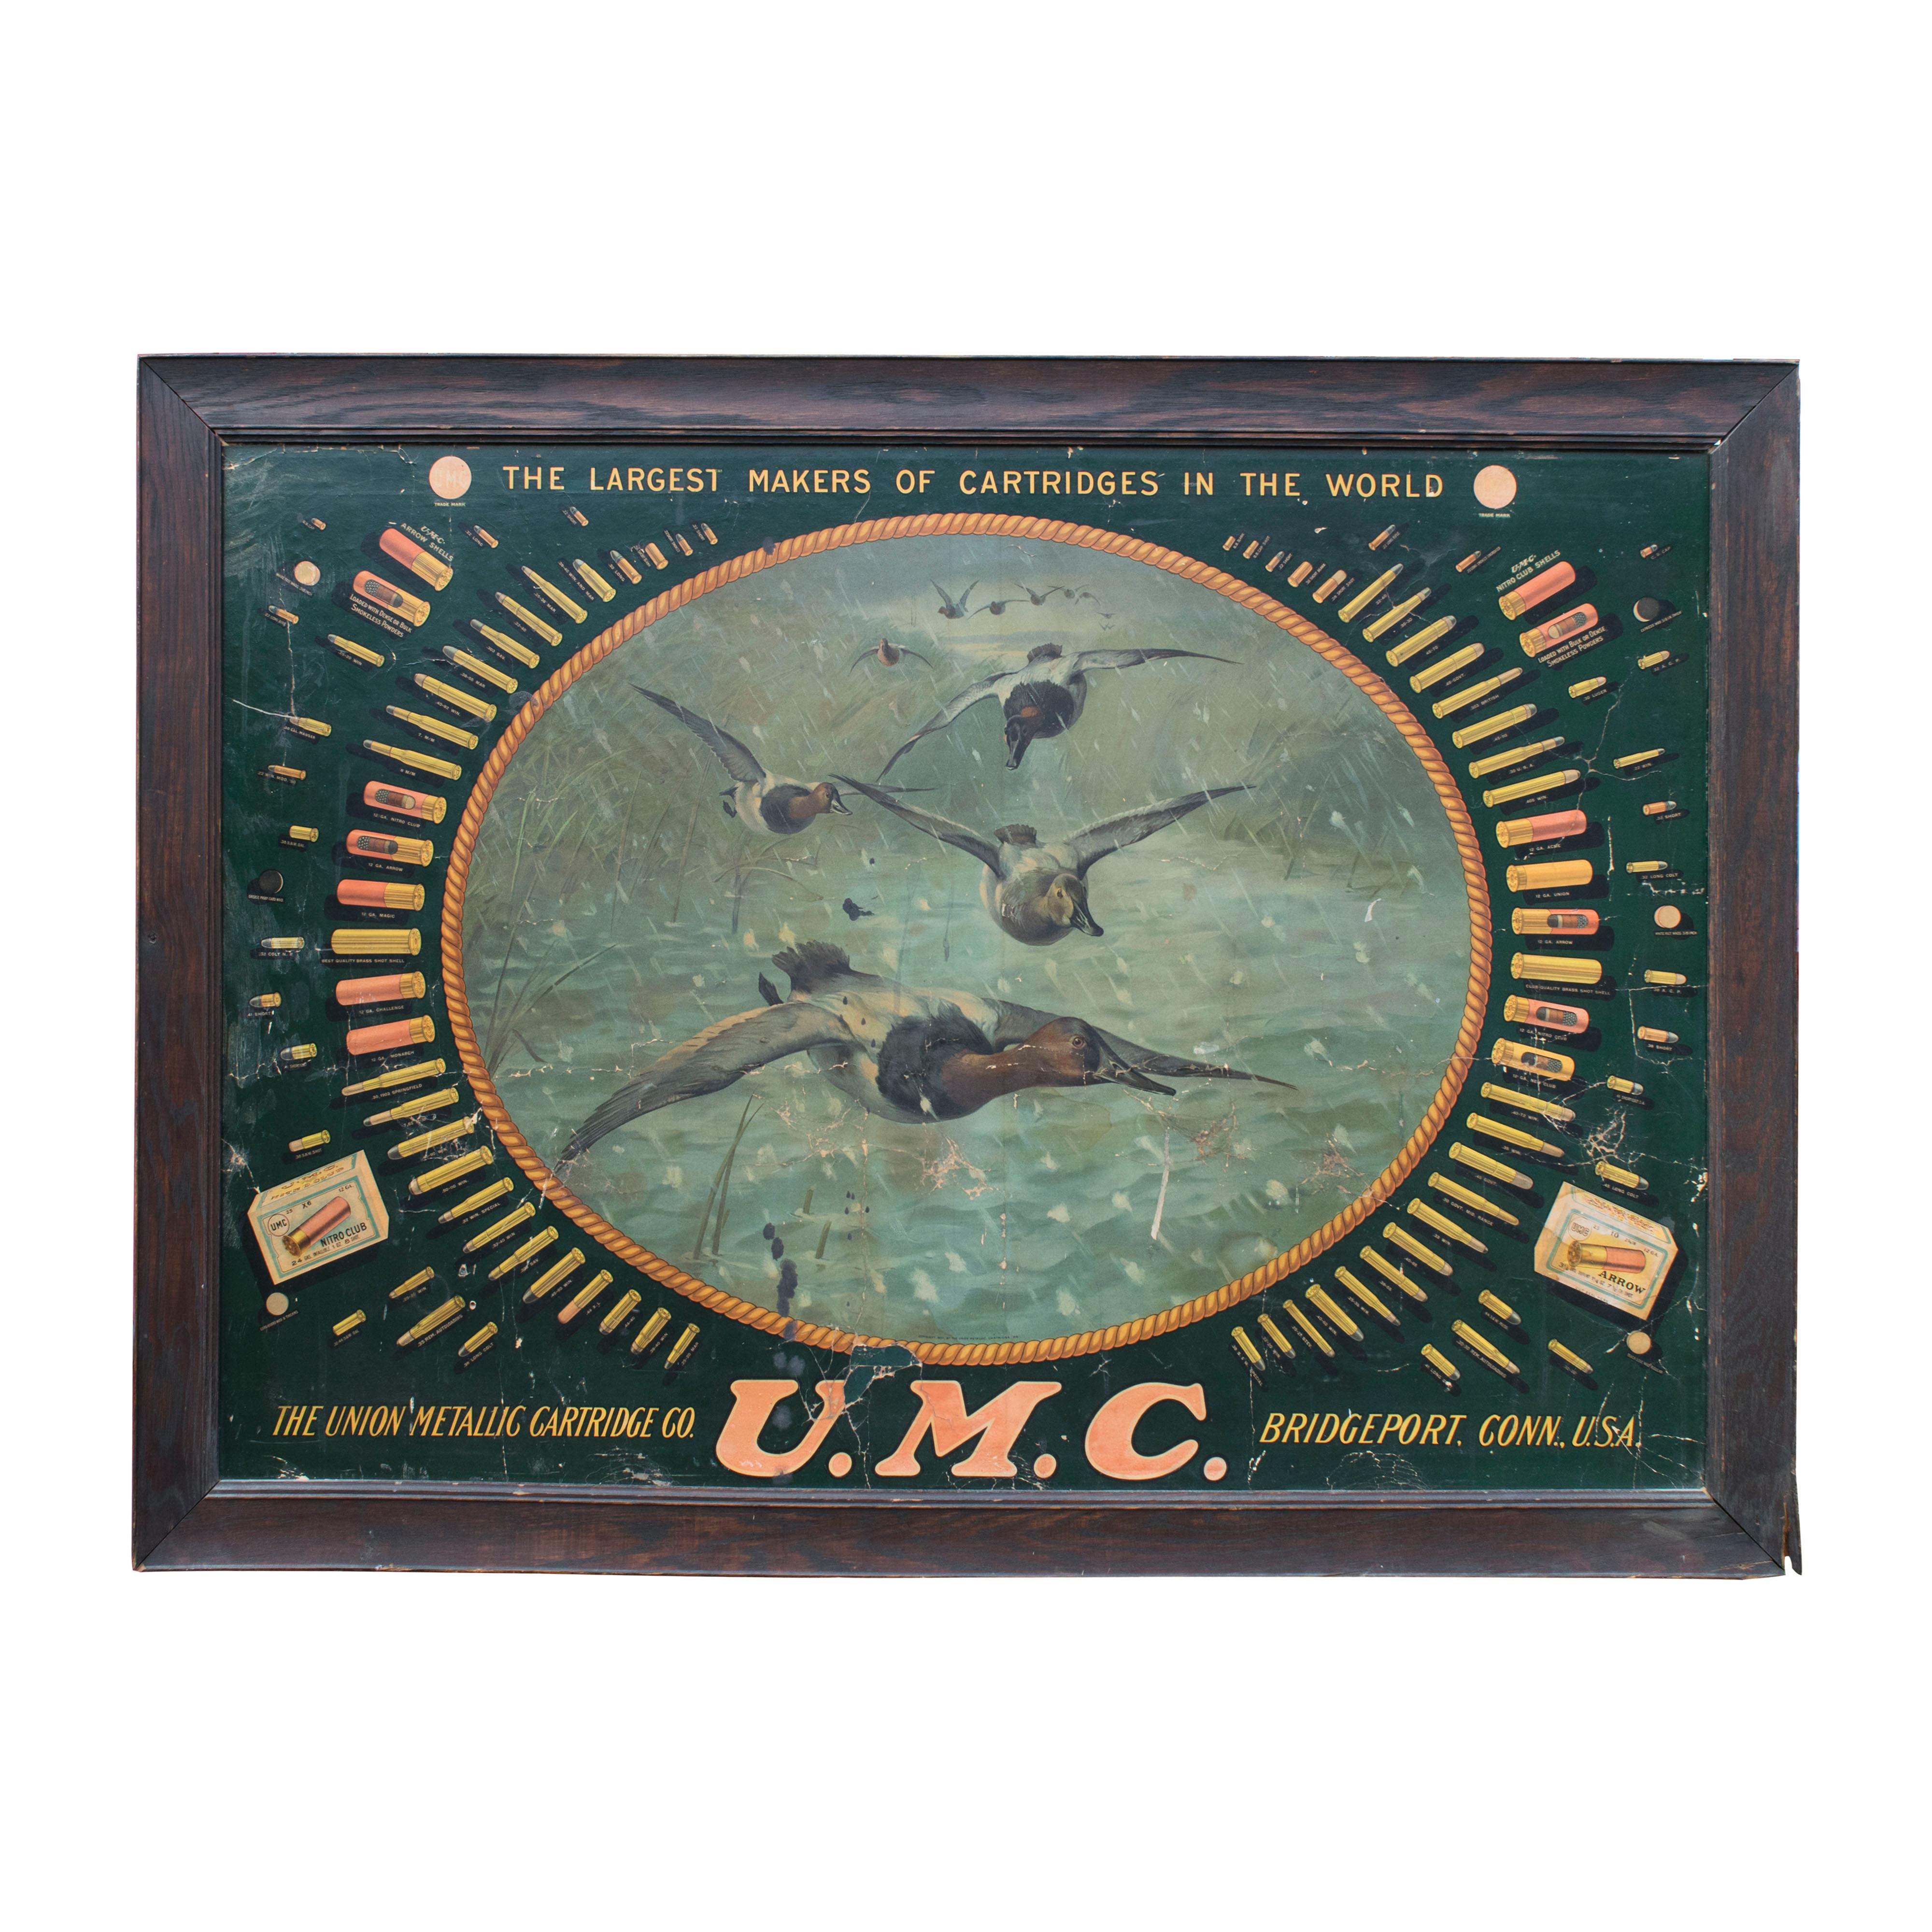 Union Metallic Cartridge Company
Item Number: A0968

Original U.M. Union Metallic Cartridge Co. bullet board lithograph. Vintage with original frame. This was a promotional item that was sent to dealers to advertise U.M.C. ammunition.

PERIOD: